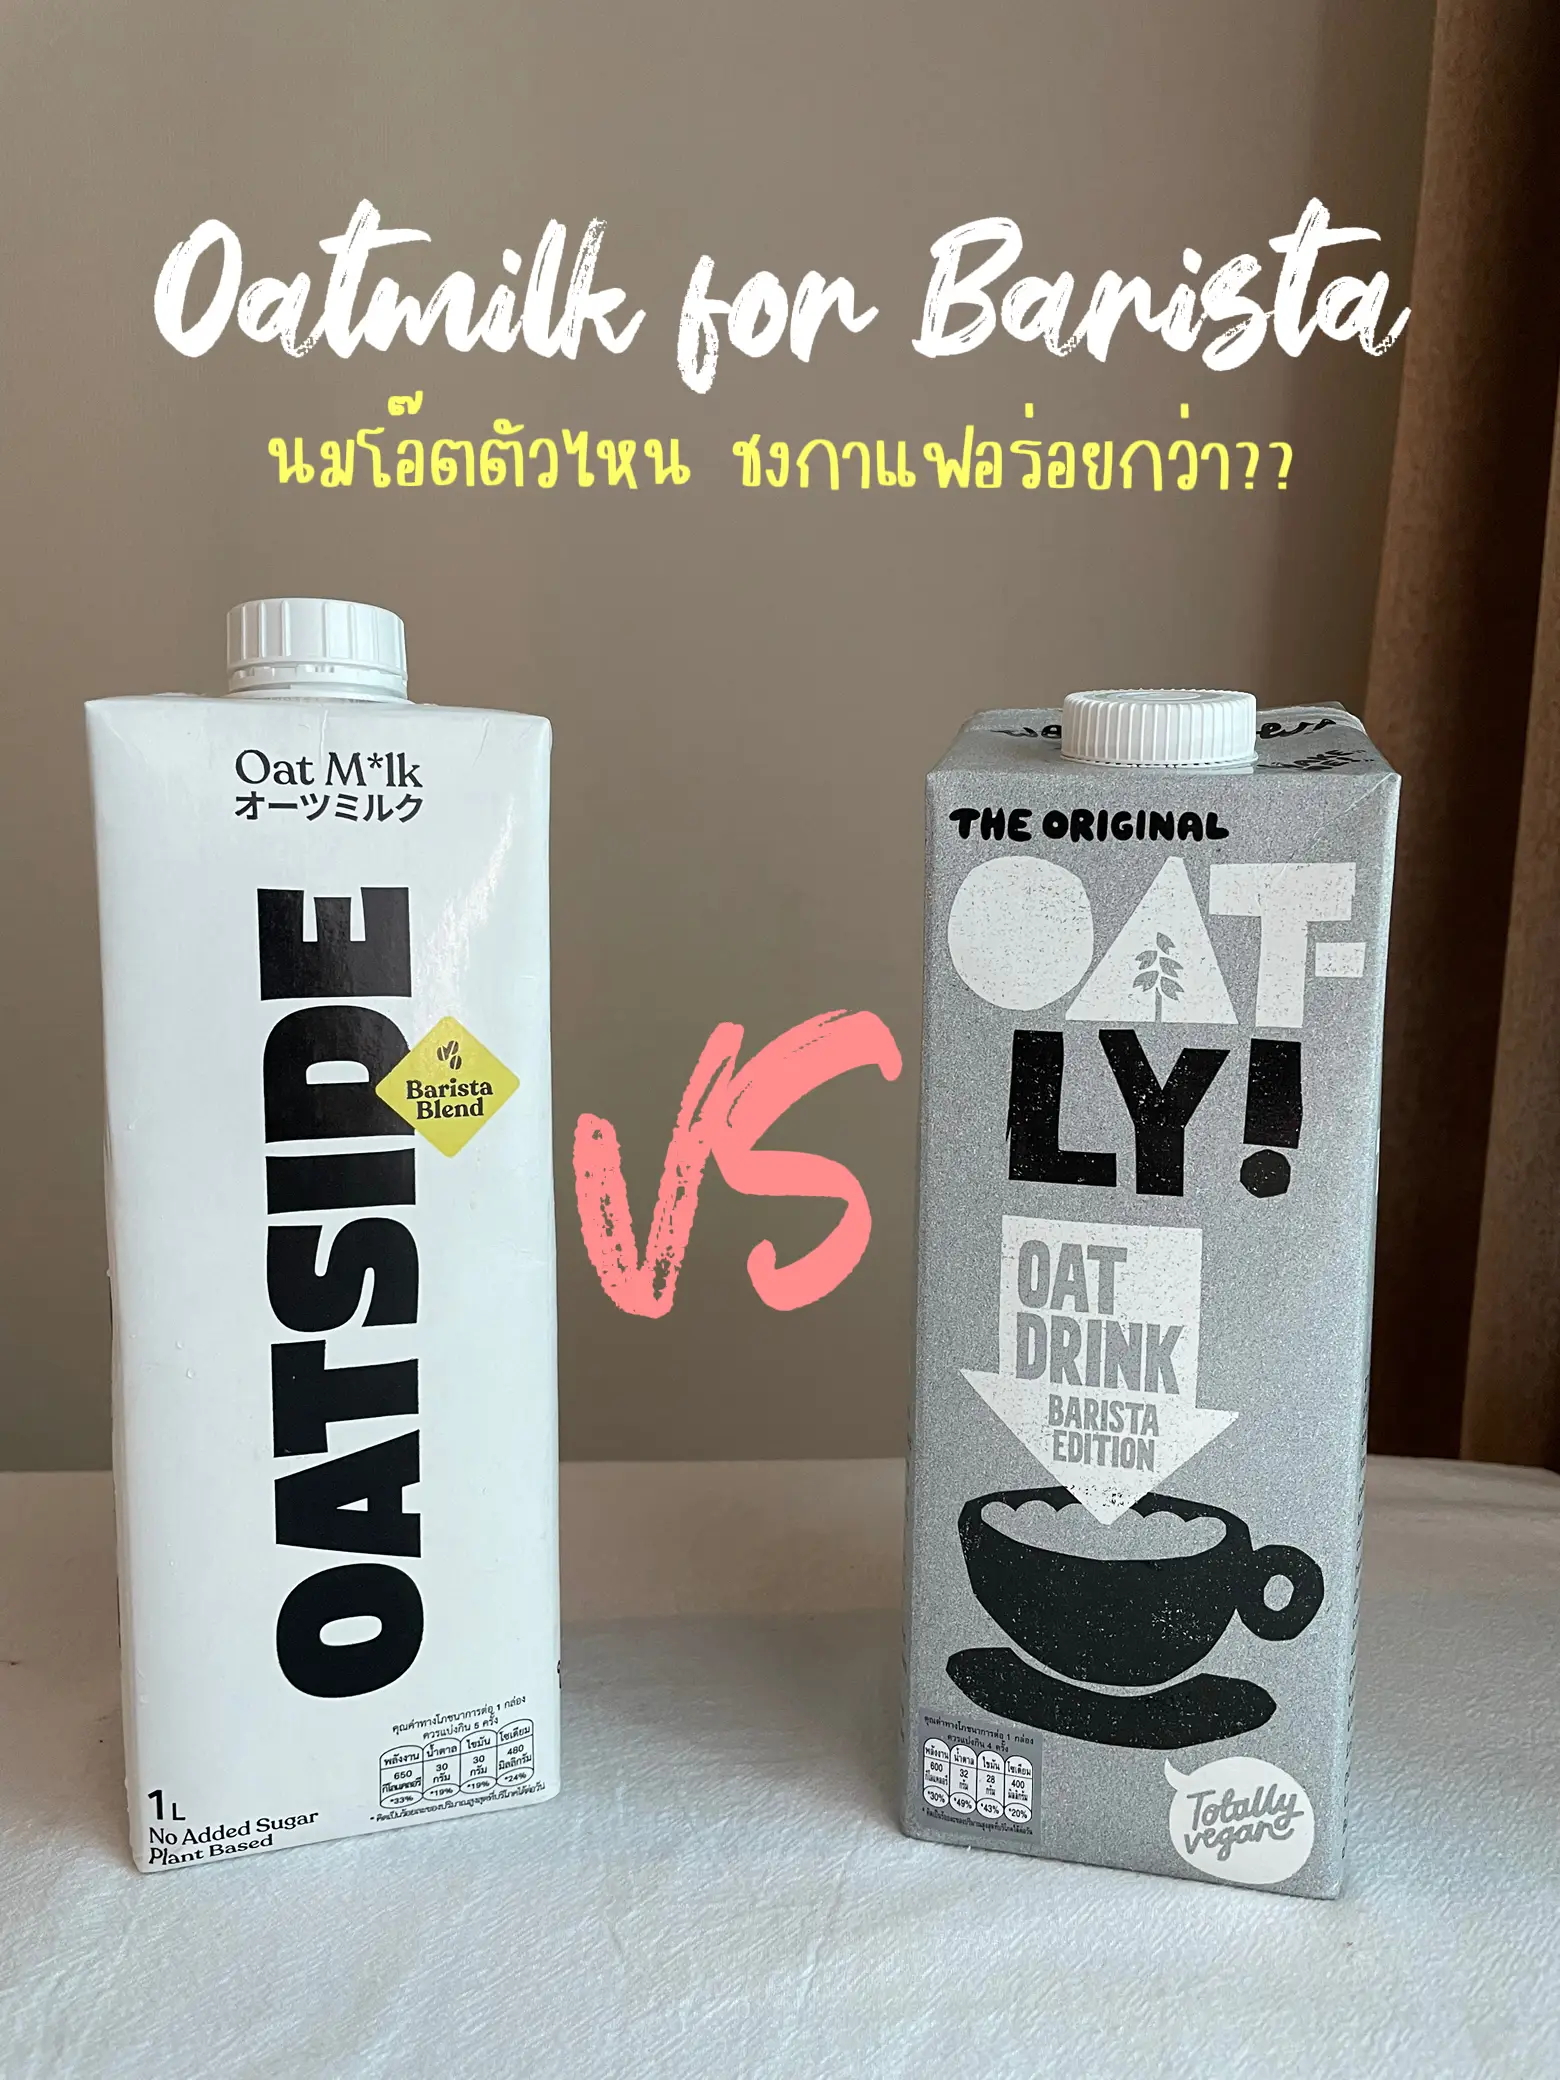 Is Oatly bad for you or not?